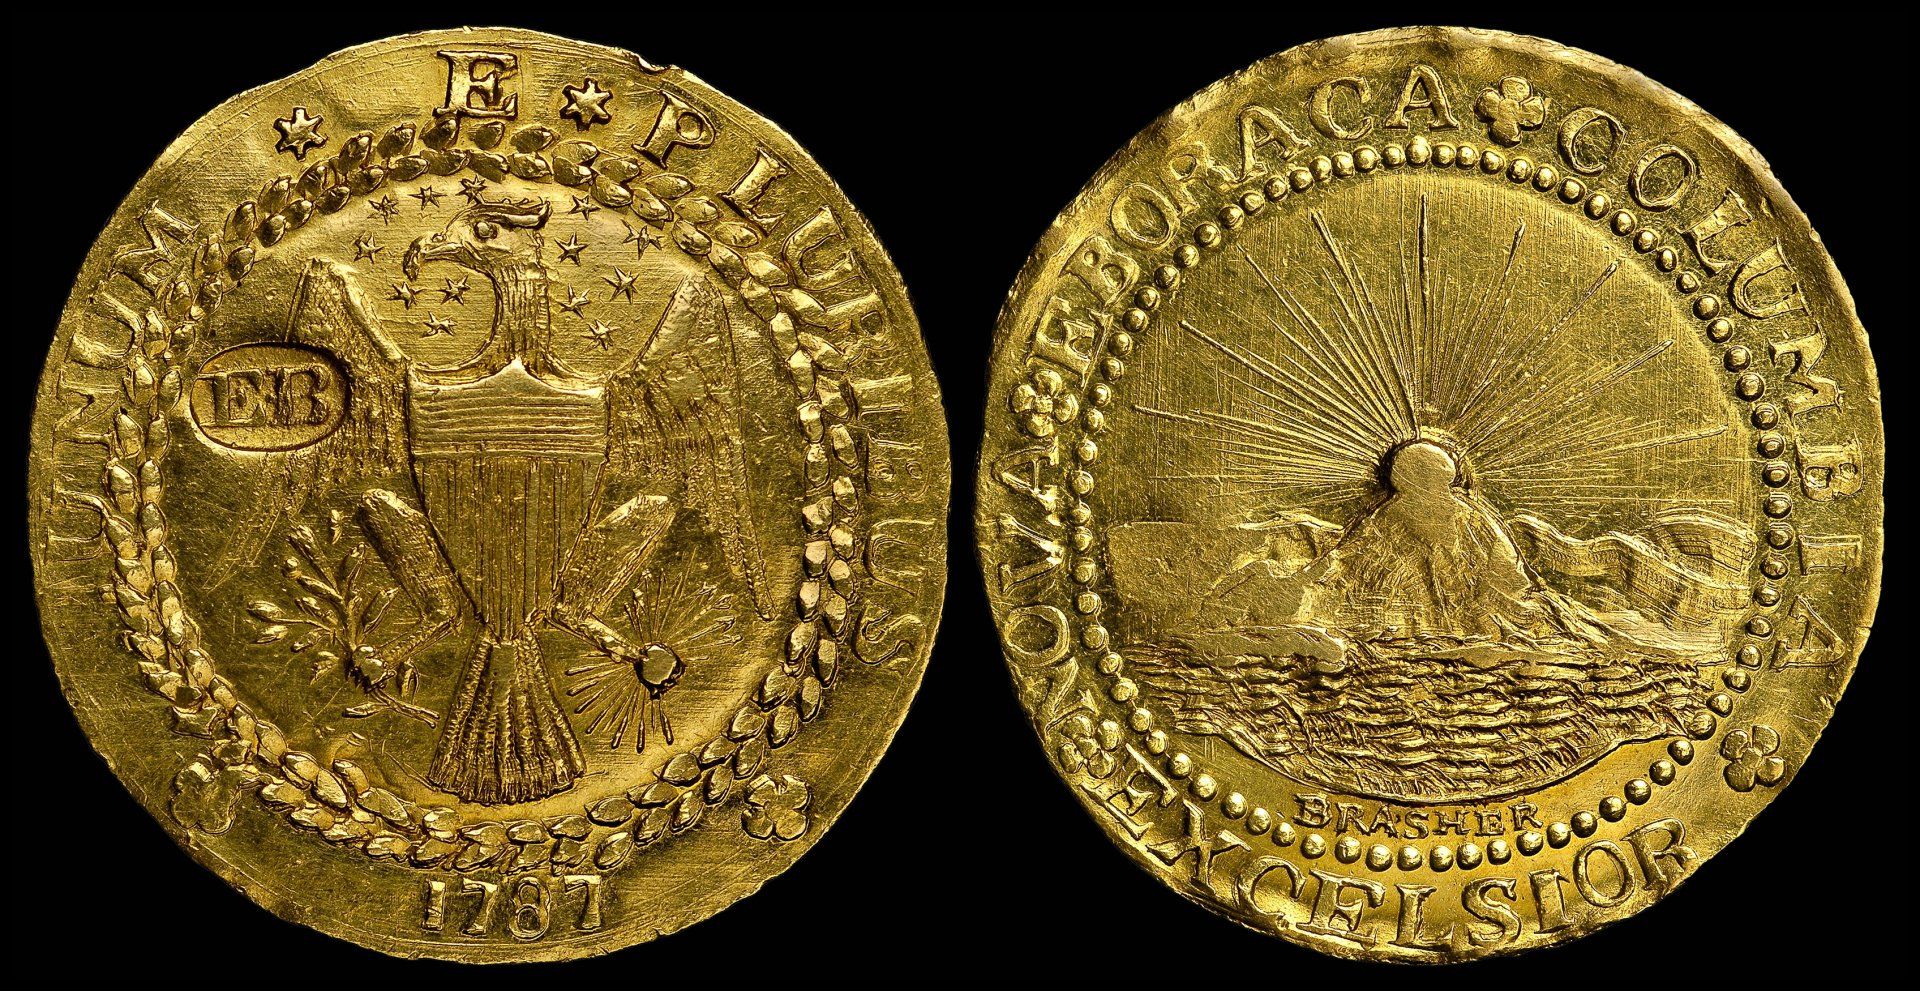 1787 Brasher Doubloon - Image Courtesy of Heritage Auctions, HA.com